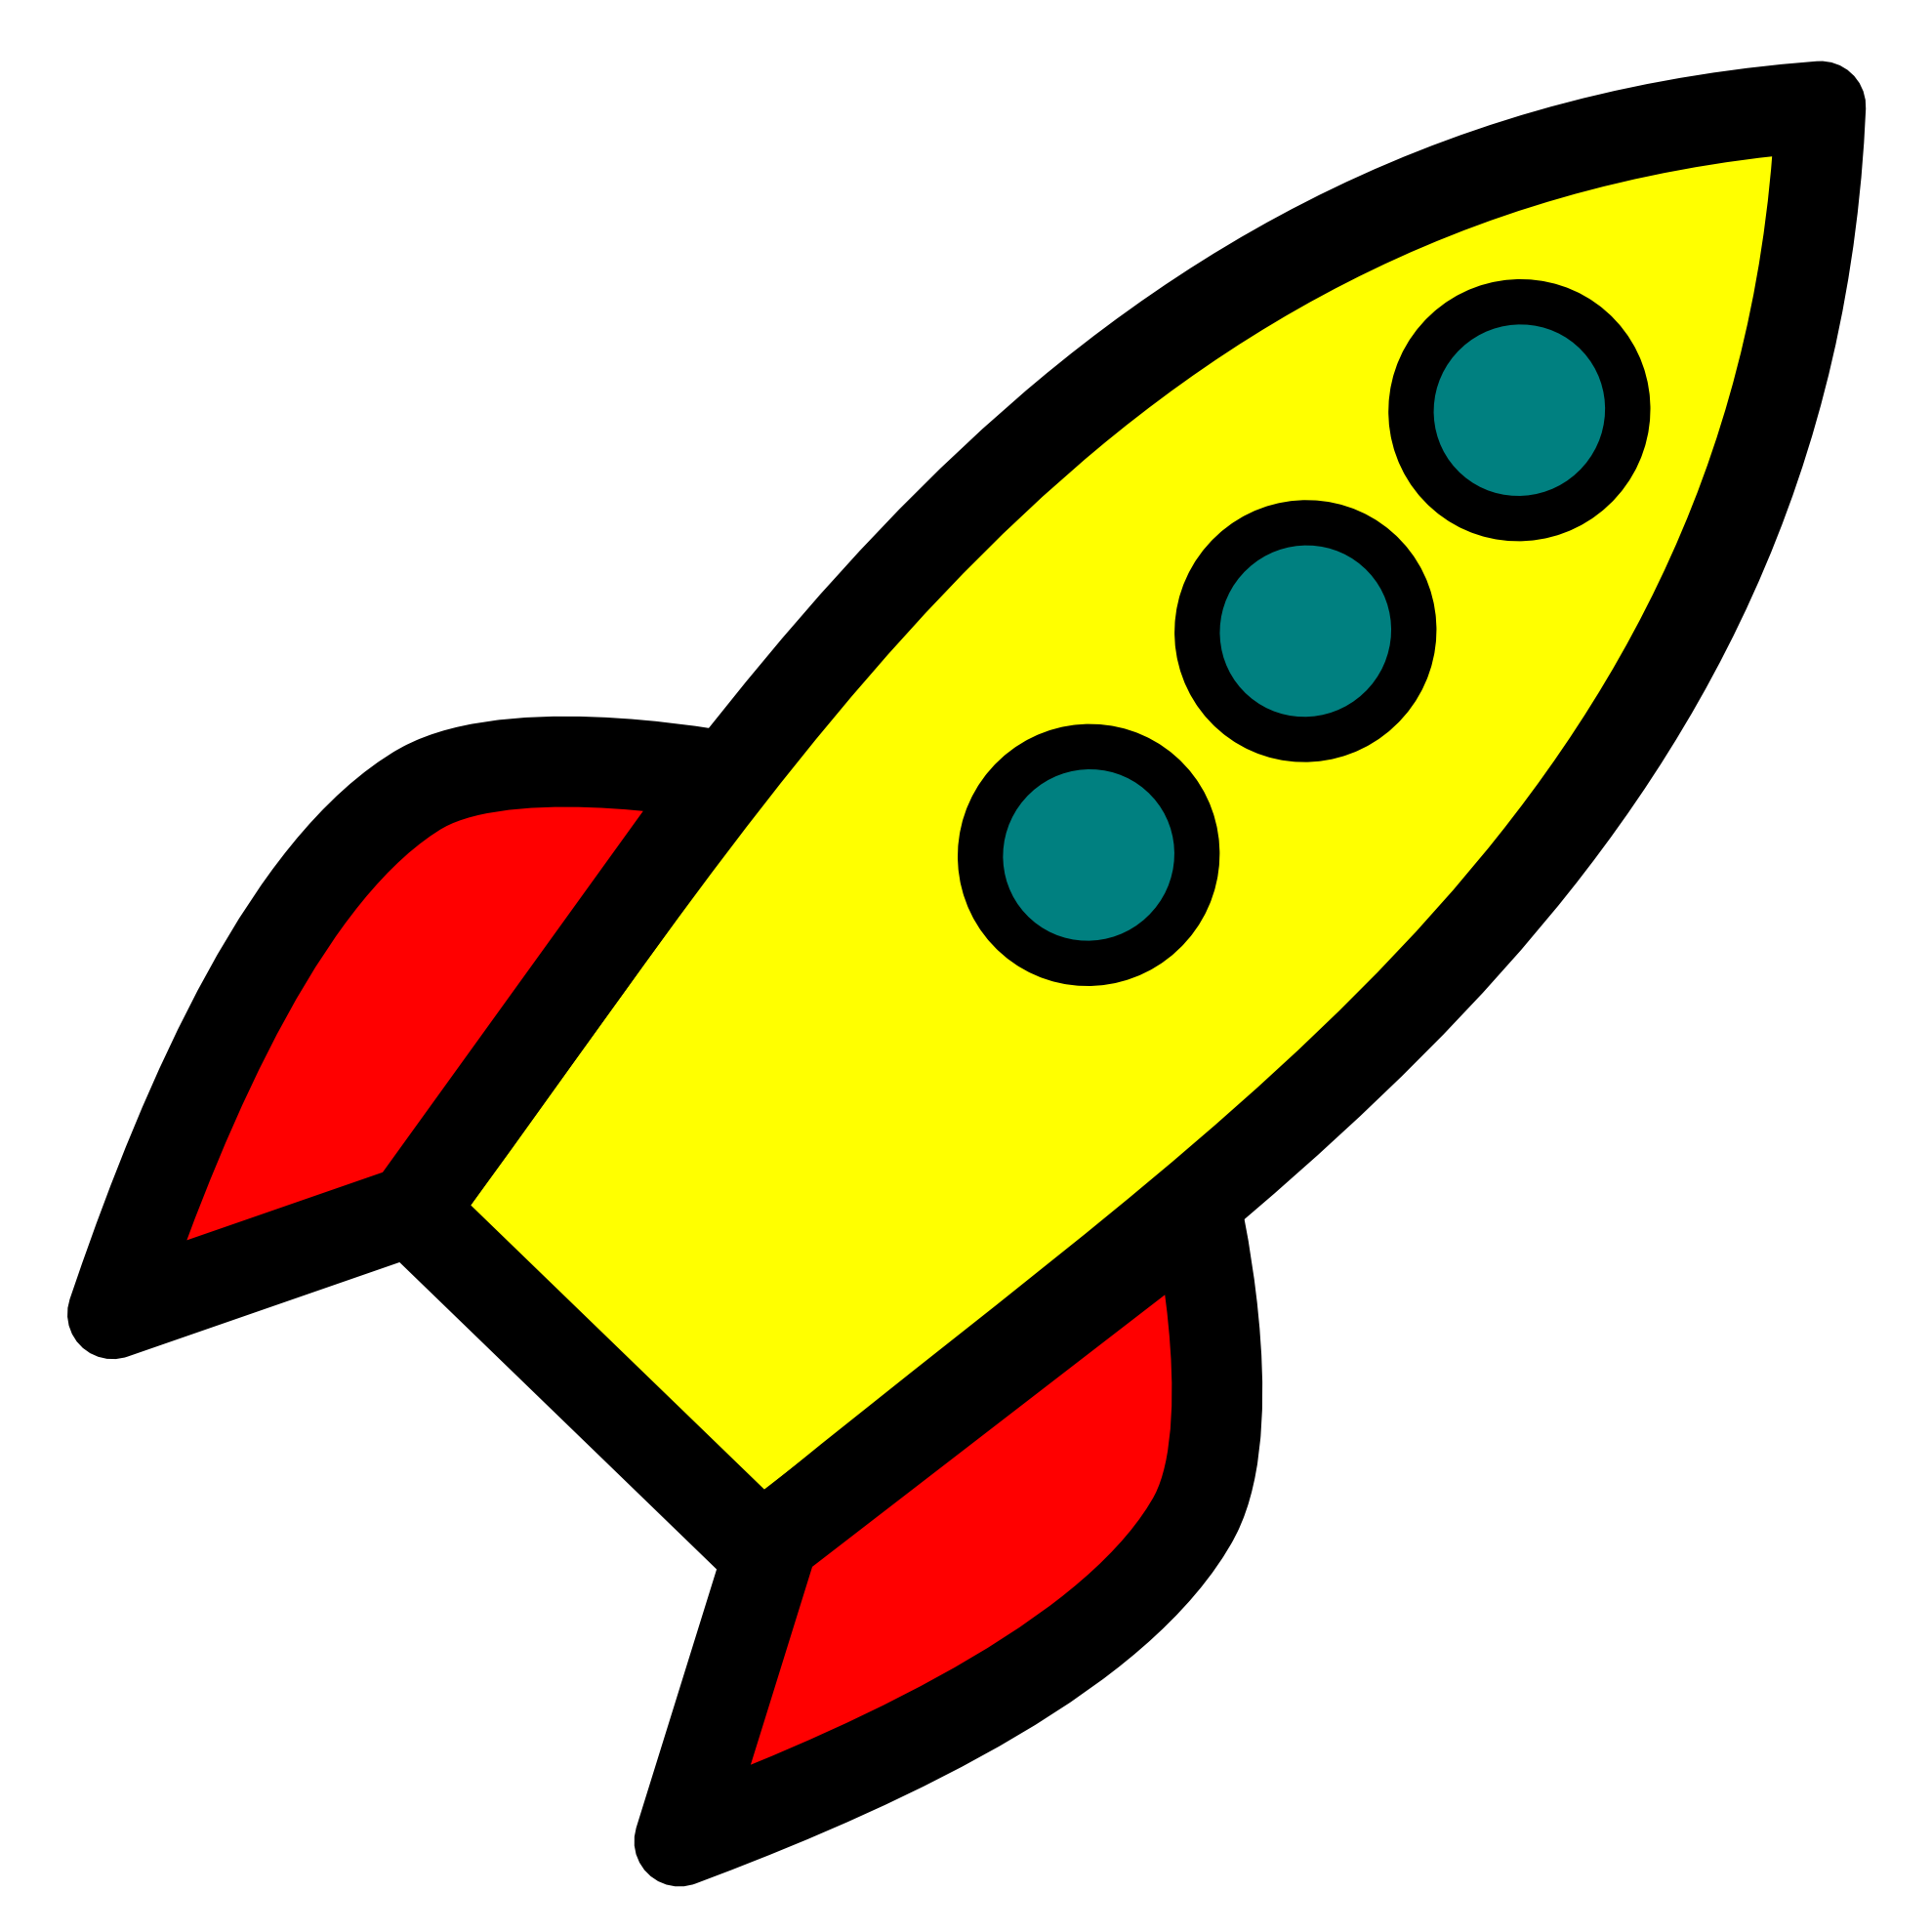 Space rocket clipart clipart kid 3 - Cliparting.com